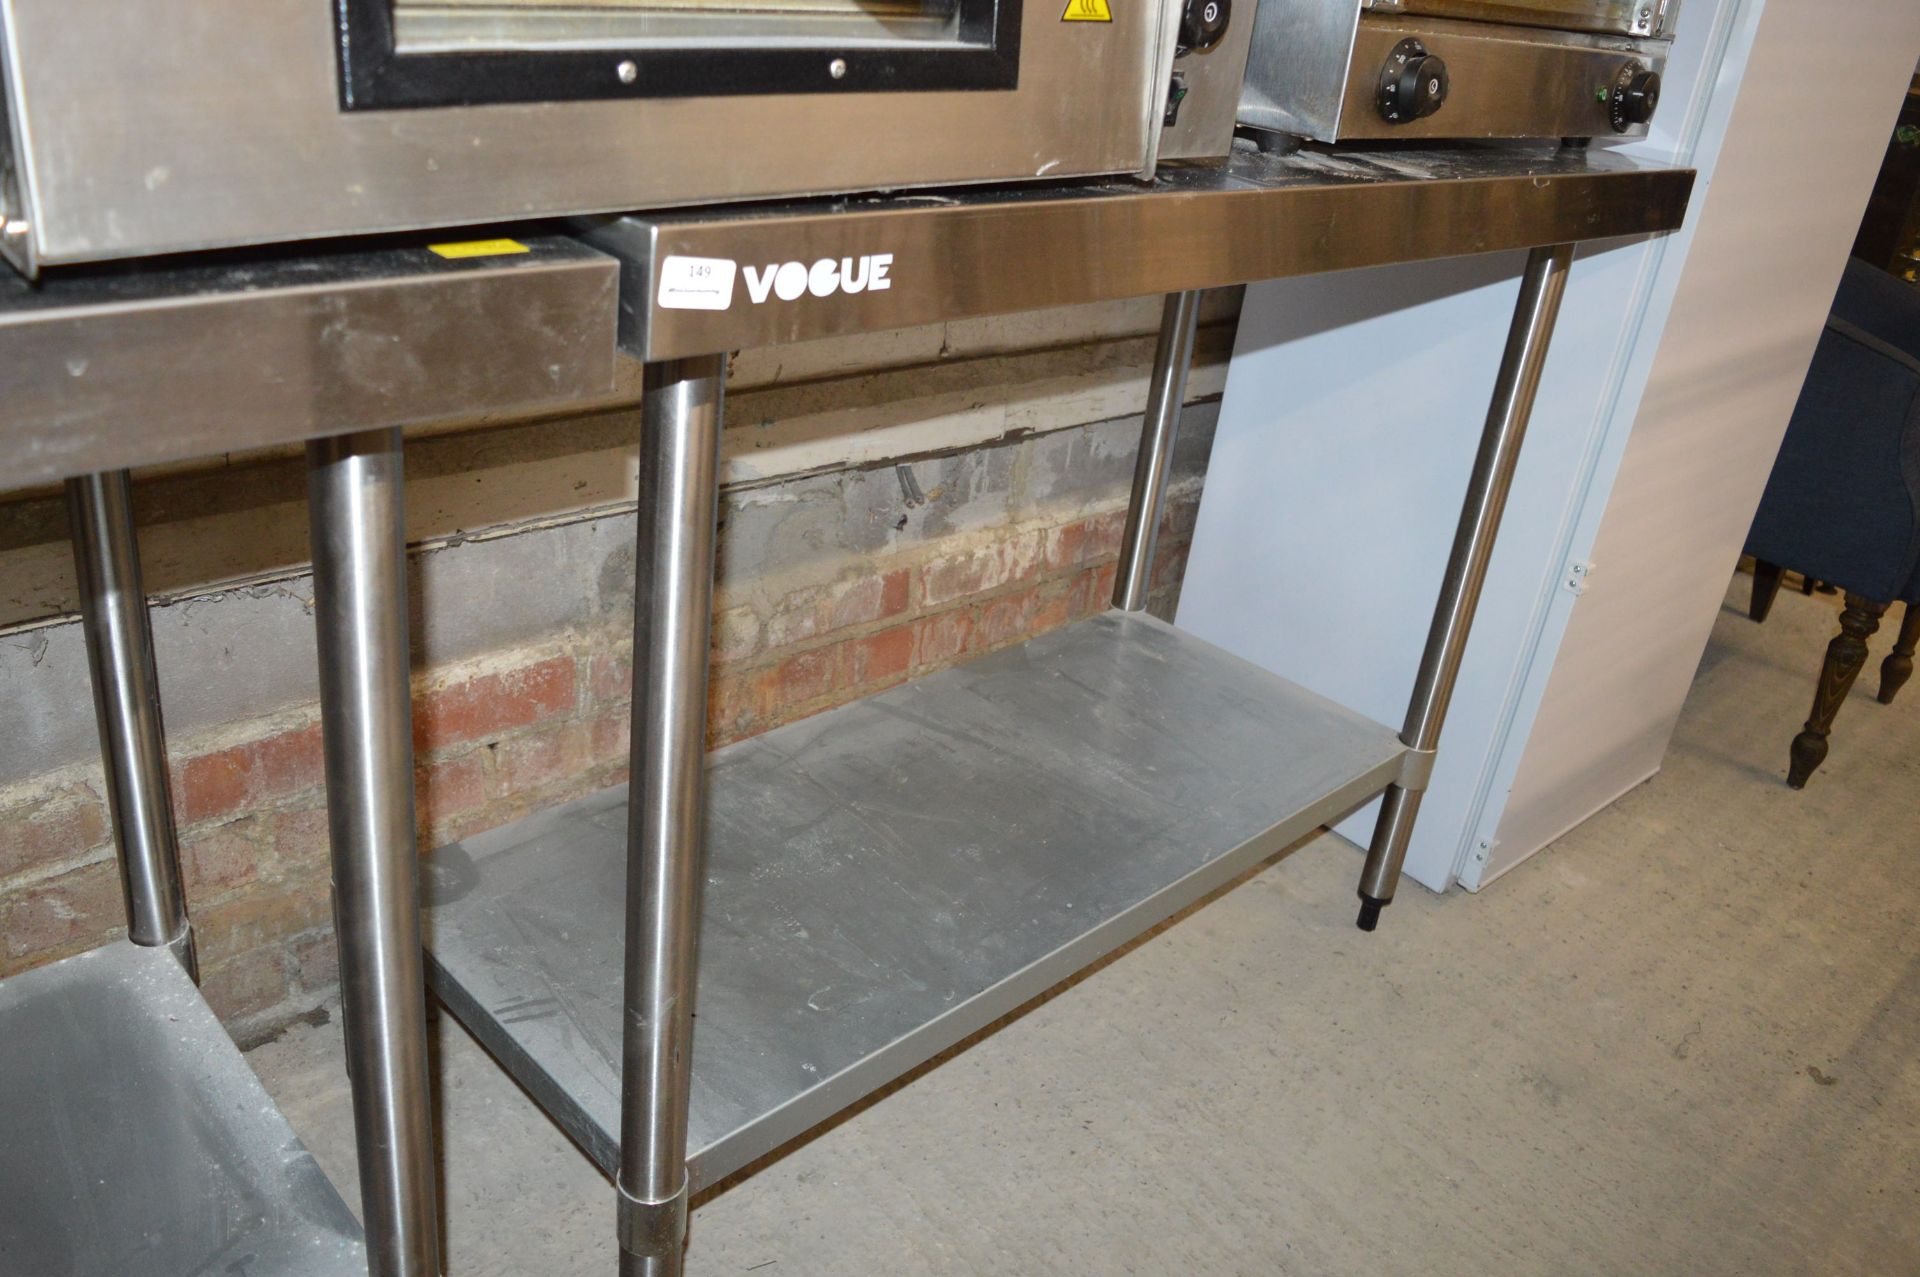 Vogue Stainless Steel Preparation Table with Undershelf